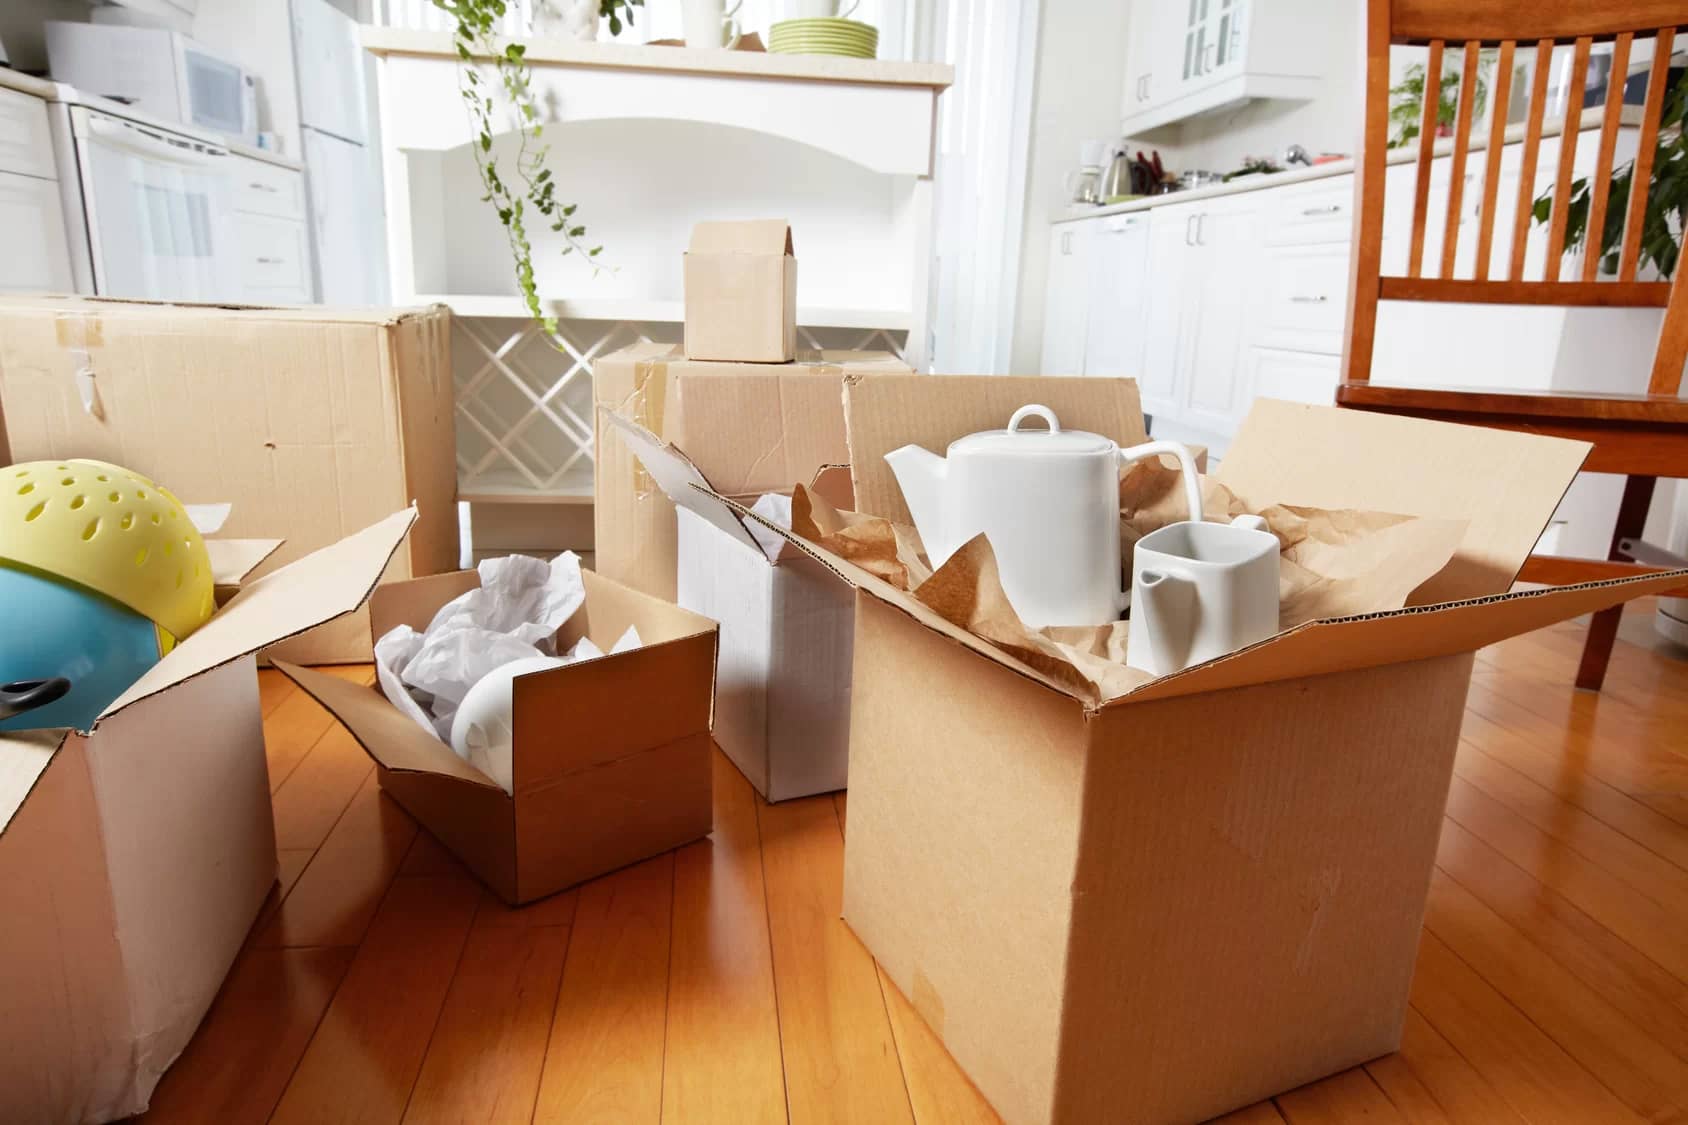 The Art of Unpacking: Organizing Your New Home After the Move